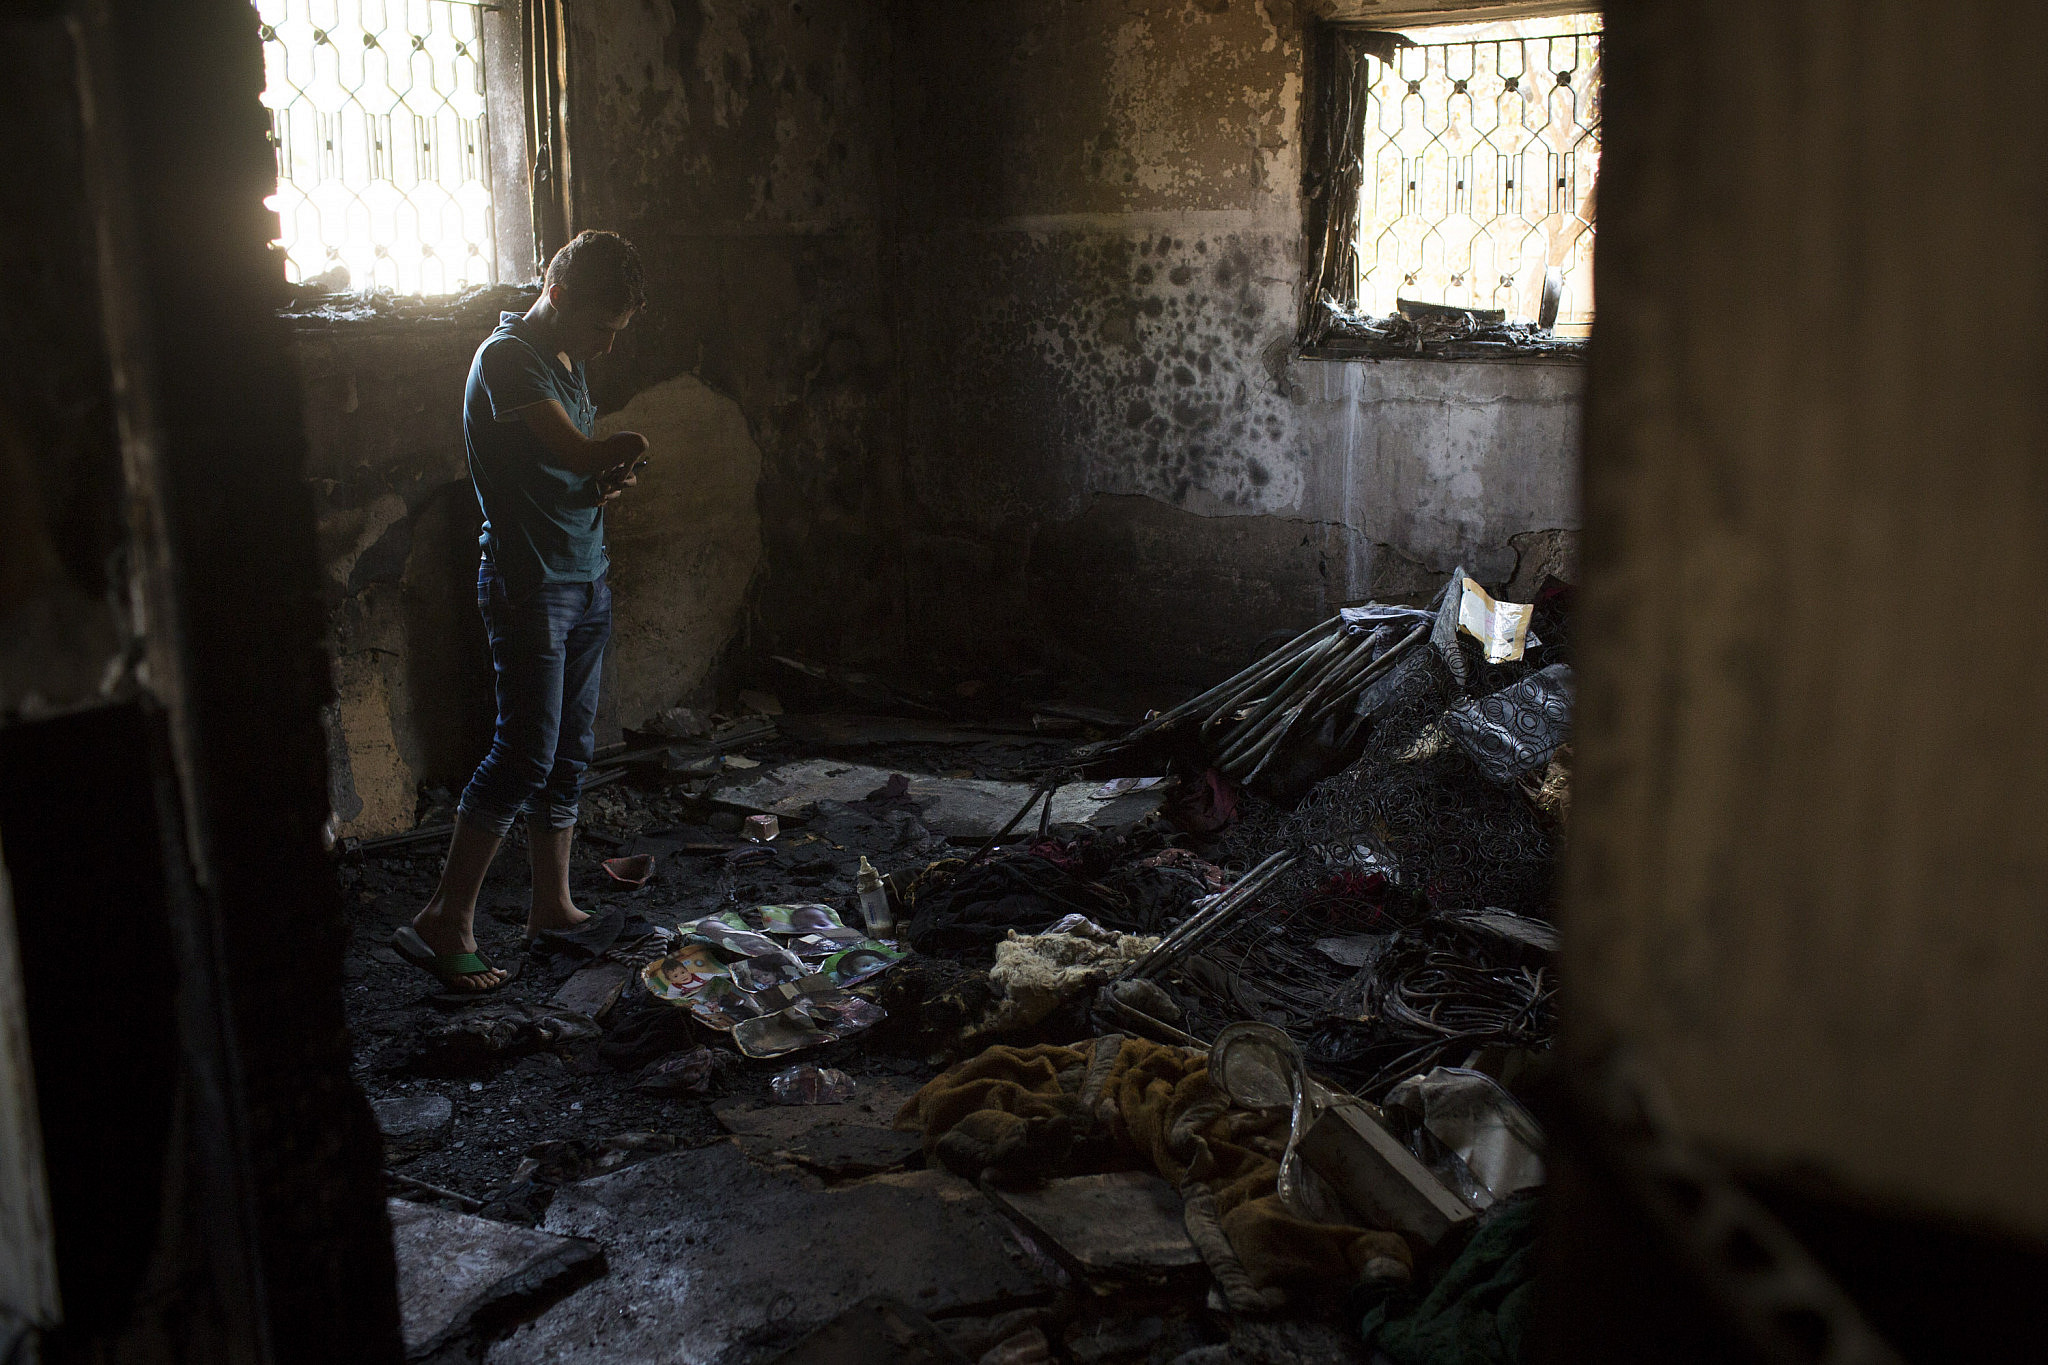 A Palestinian man look at the damaged house of the Dawabsheh family, which was set on fire by Jewish settlers and where 18-month-old toddler Ali died, in the West Bank village of Duma, July 31, 2015. (Oren Ziv/Activestills)